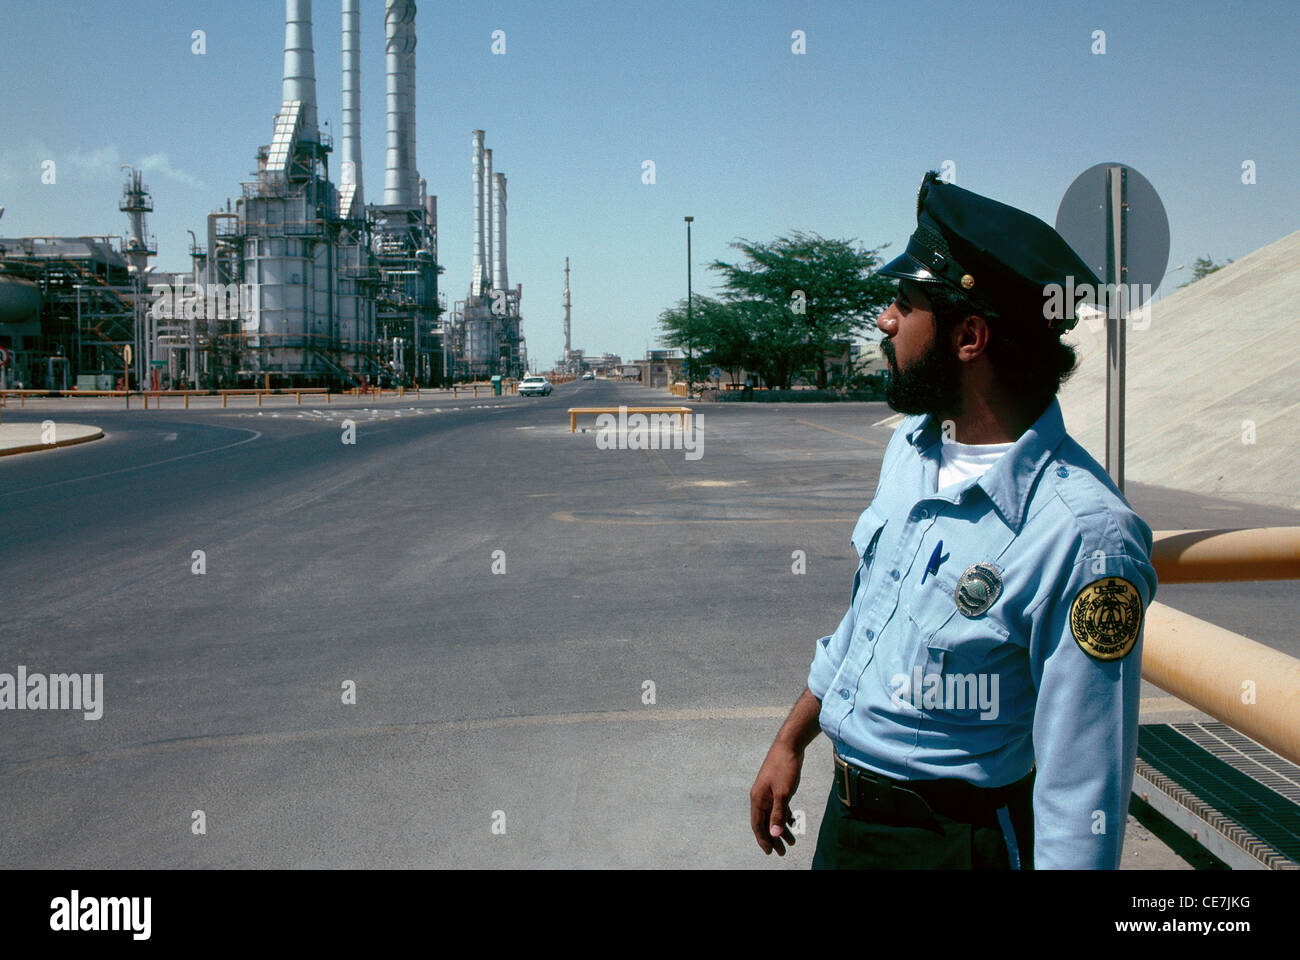 The largest oil refinery in the world, located at Ras Tanura, on the east coast of Saudi Arabia. Stock Photo